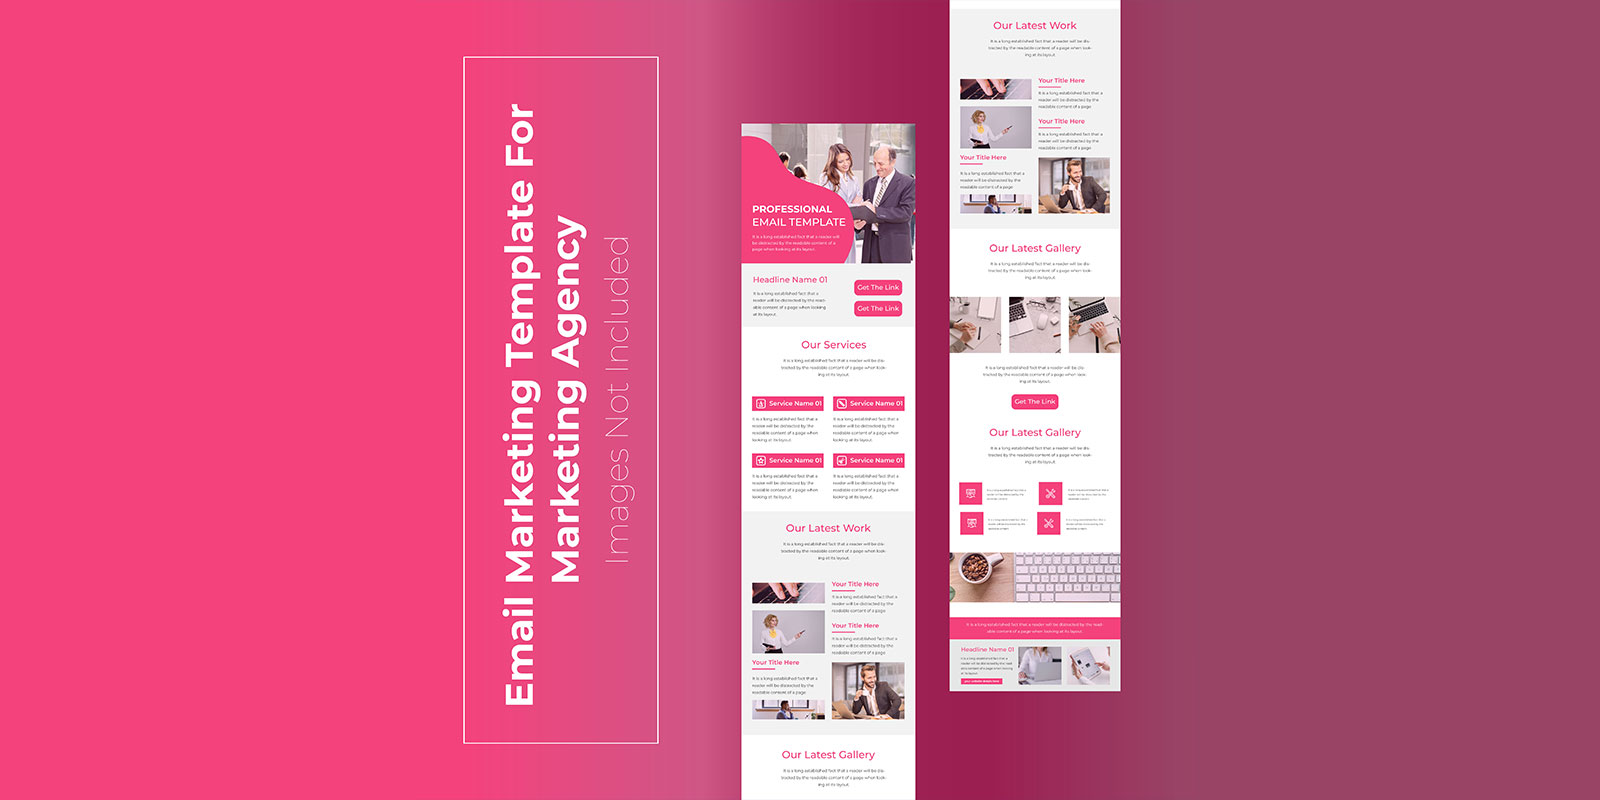 Responsive Email Marketing concept page or one page email Newsletter template